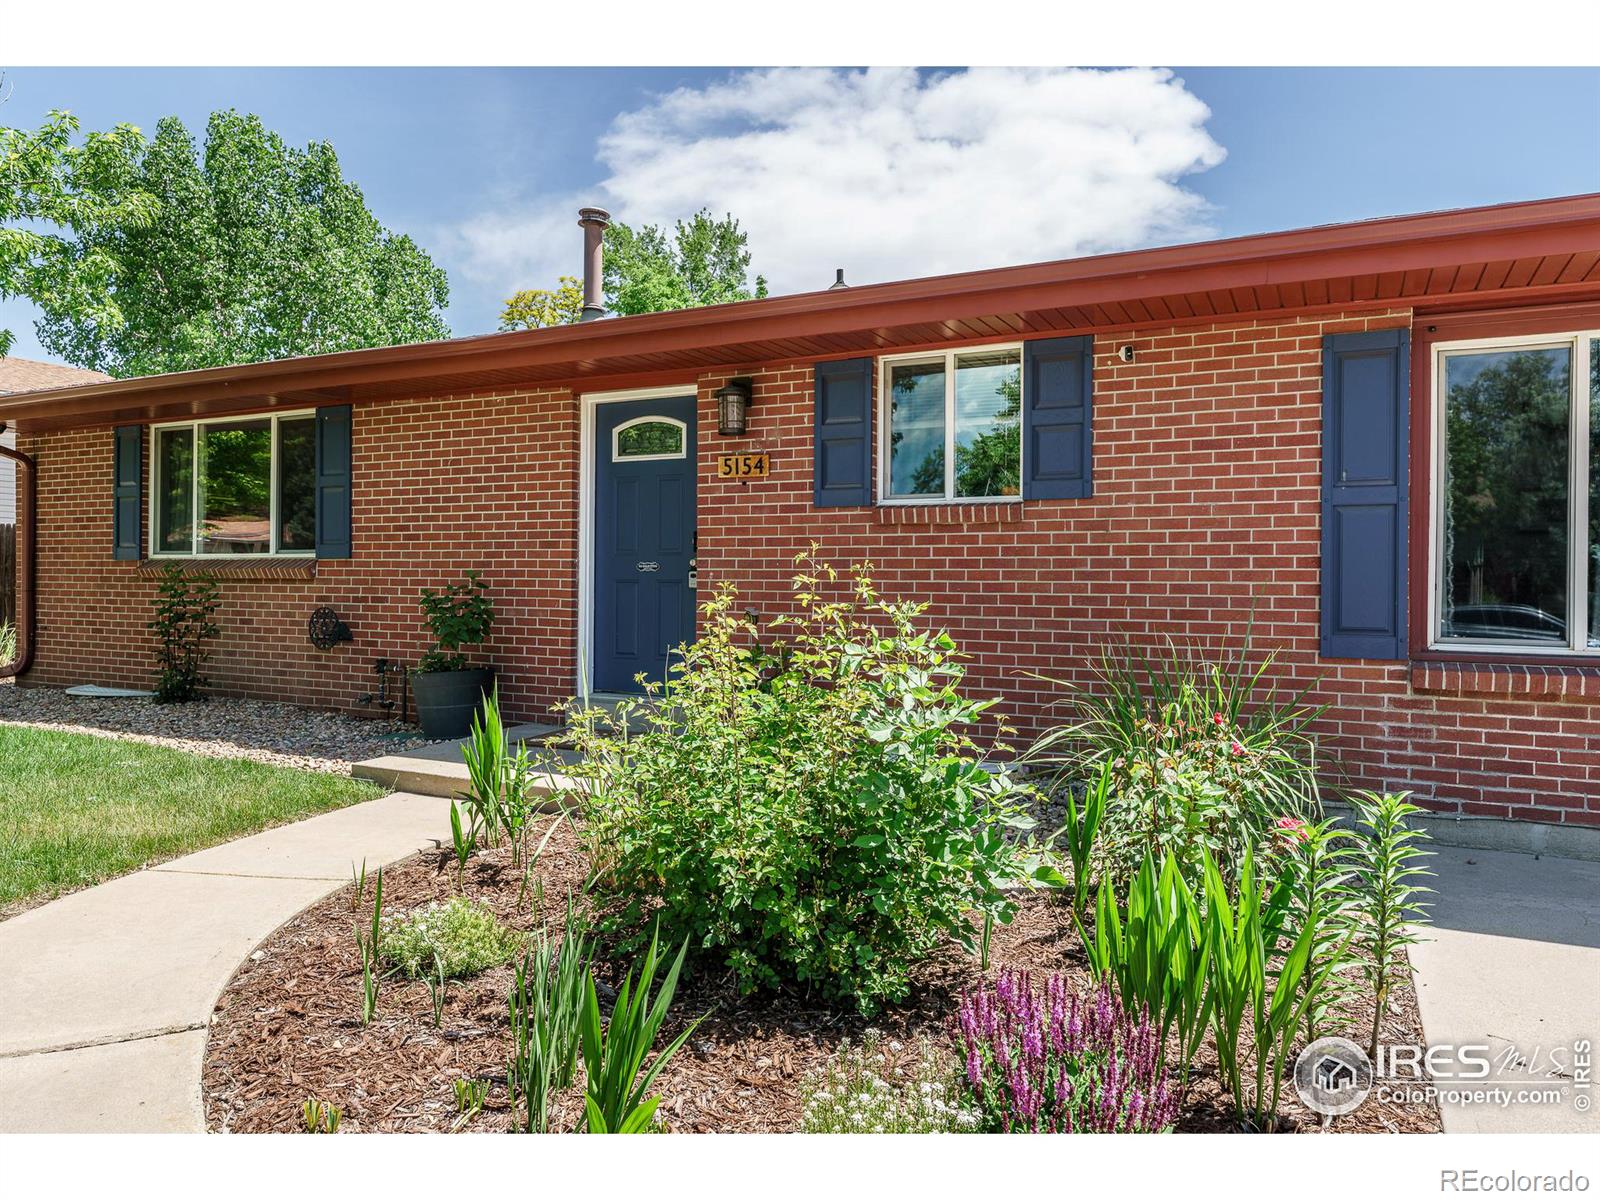 5154  zinnia court, Arvada sold home. Closed on 2024-07-26 for $644,000.